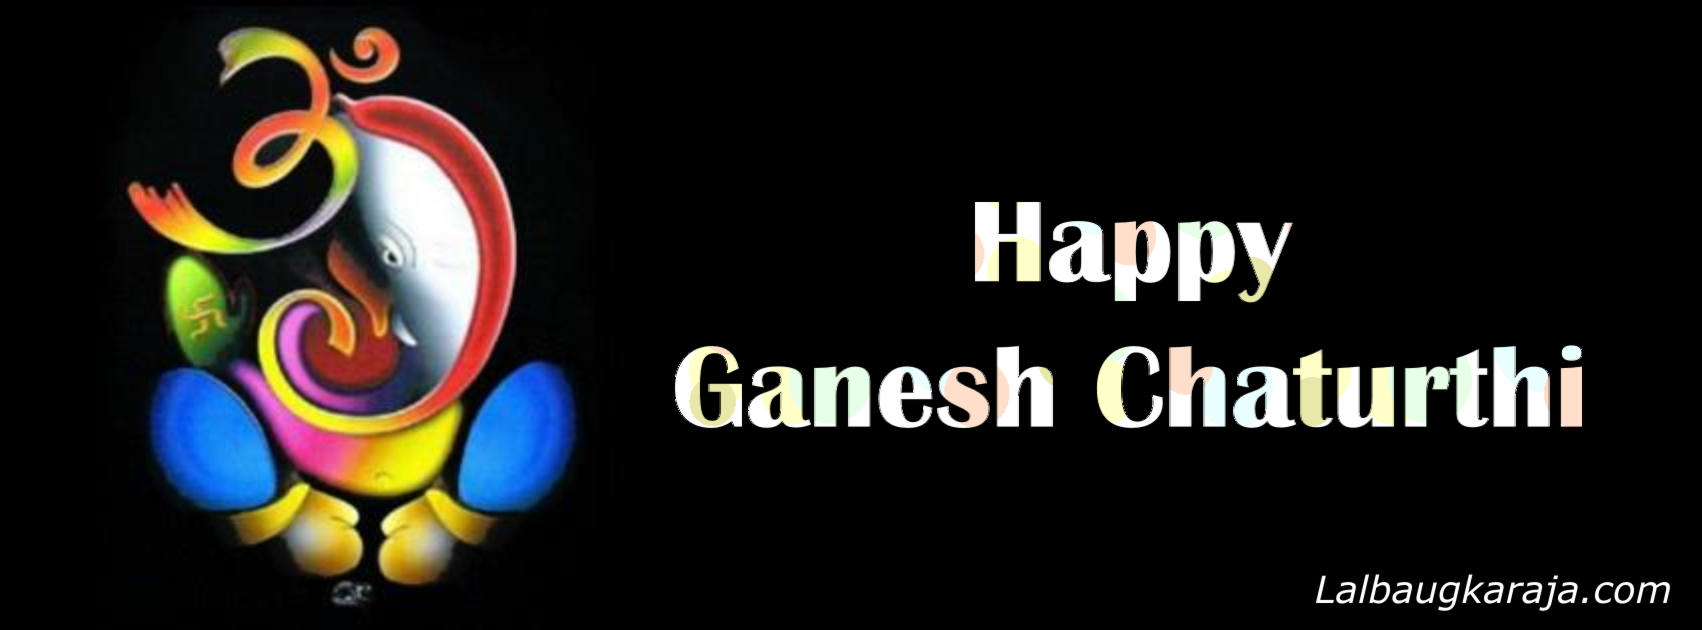 Happy Ganesh Chaturthi Facebook Cover Picture